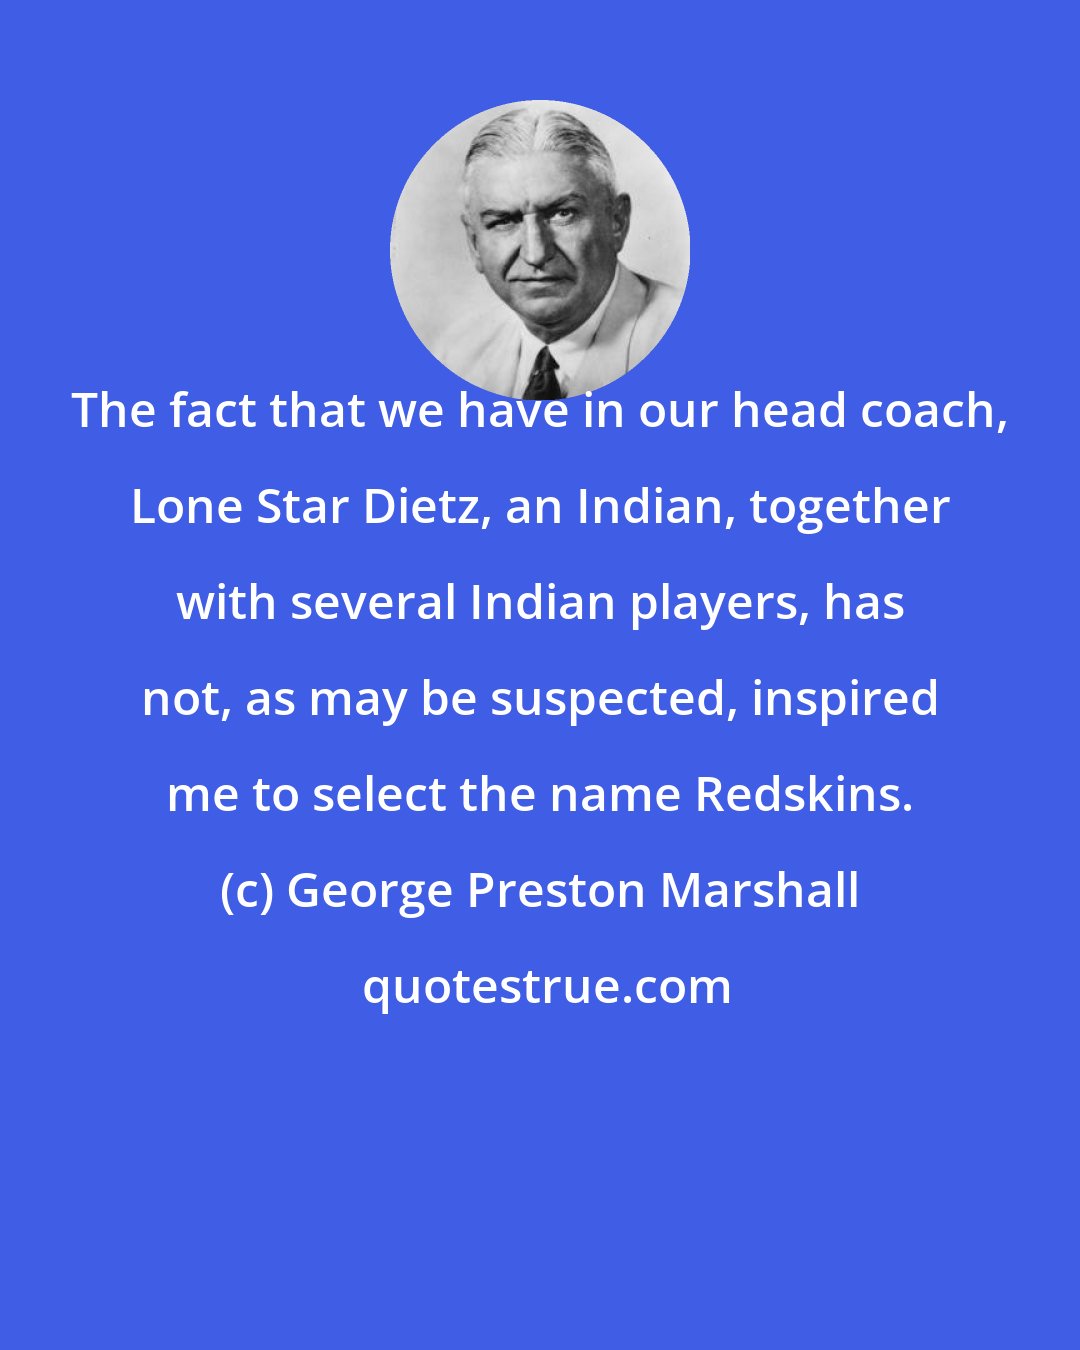 George Preston Marshall: The fact that we have in our head coach, Lone Star Dietz, an Indian, together with several Indian players, has not, as may be suspected, inspired me to select the name Redskins.